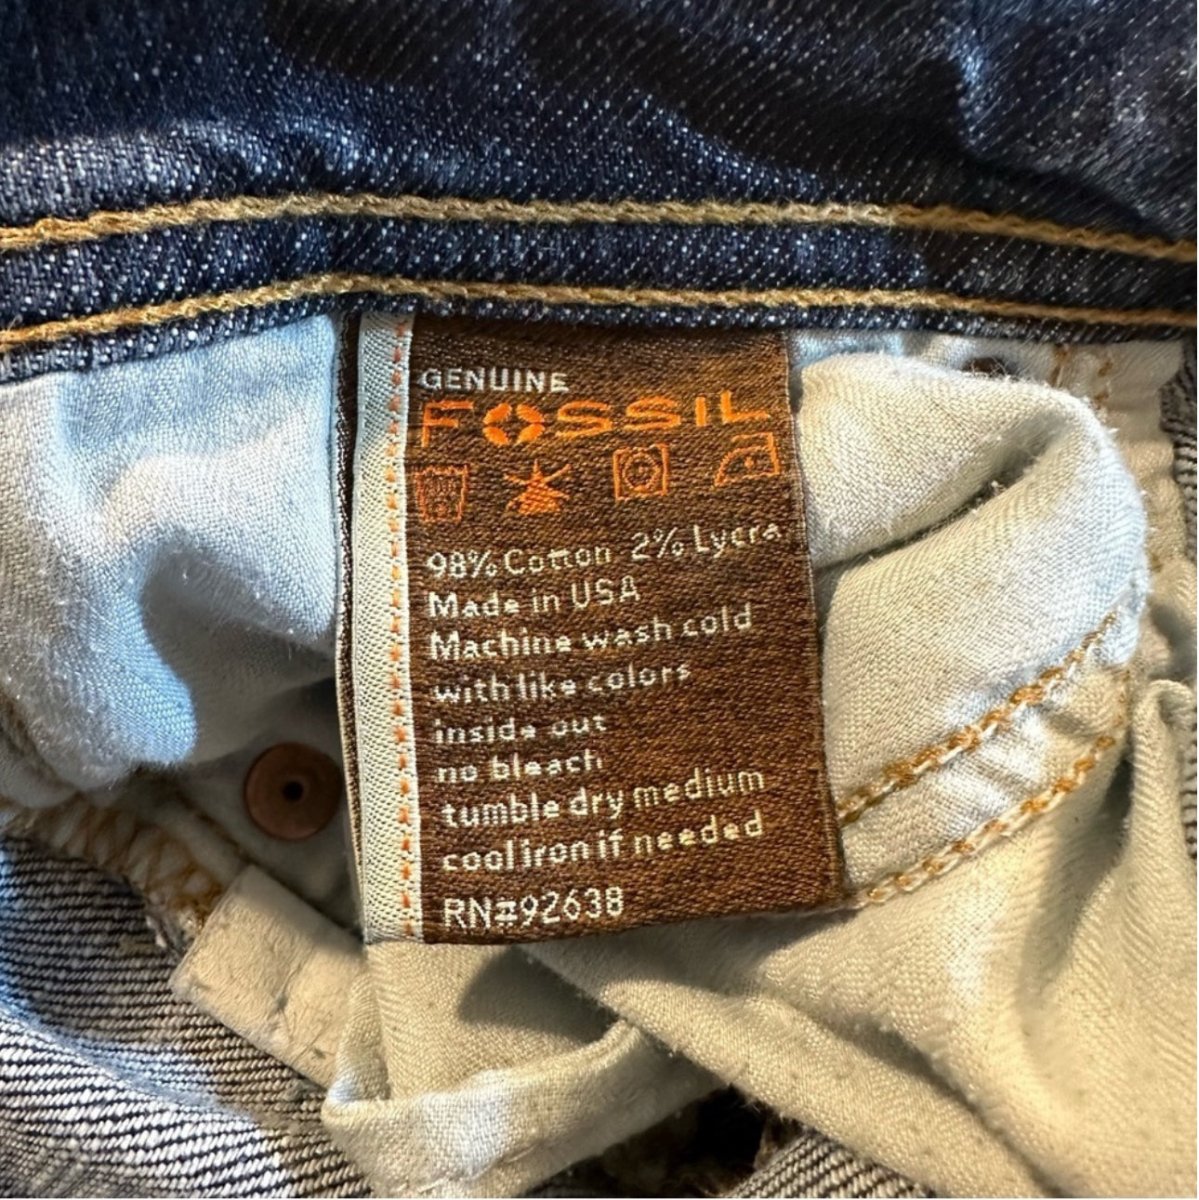 Fossil - Fossil Size 29 Medium Wash Mid Rise Slim Bootcut Jeans 98% Cotton - Jeans - Afterglow Market